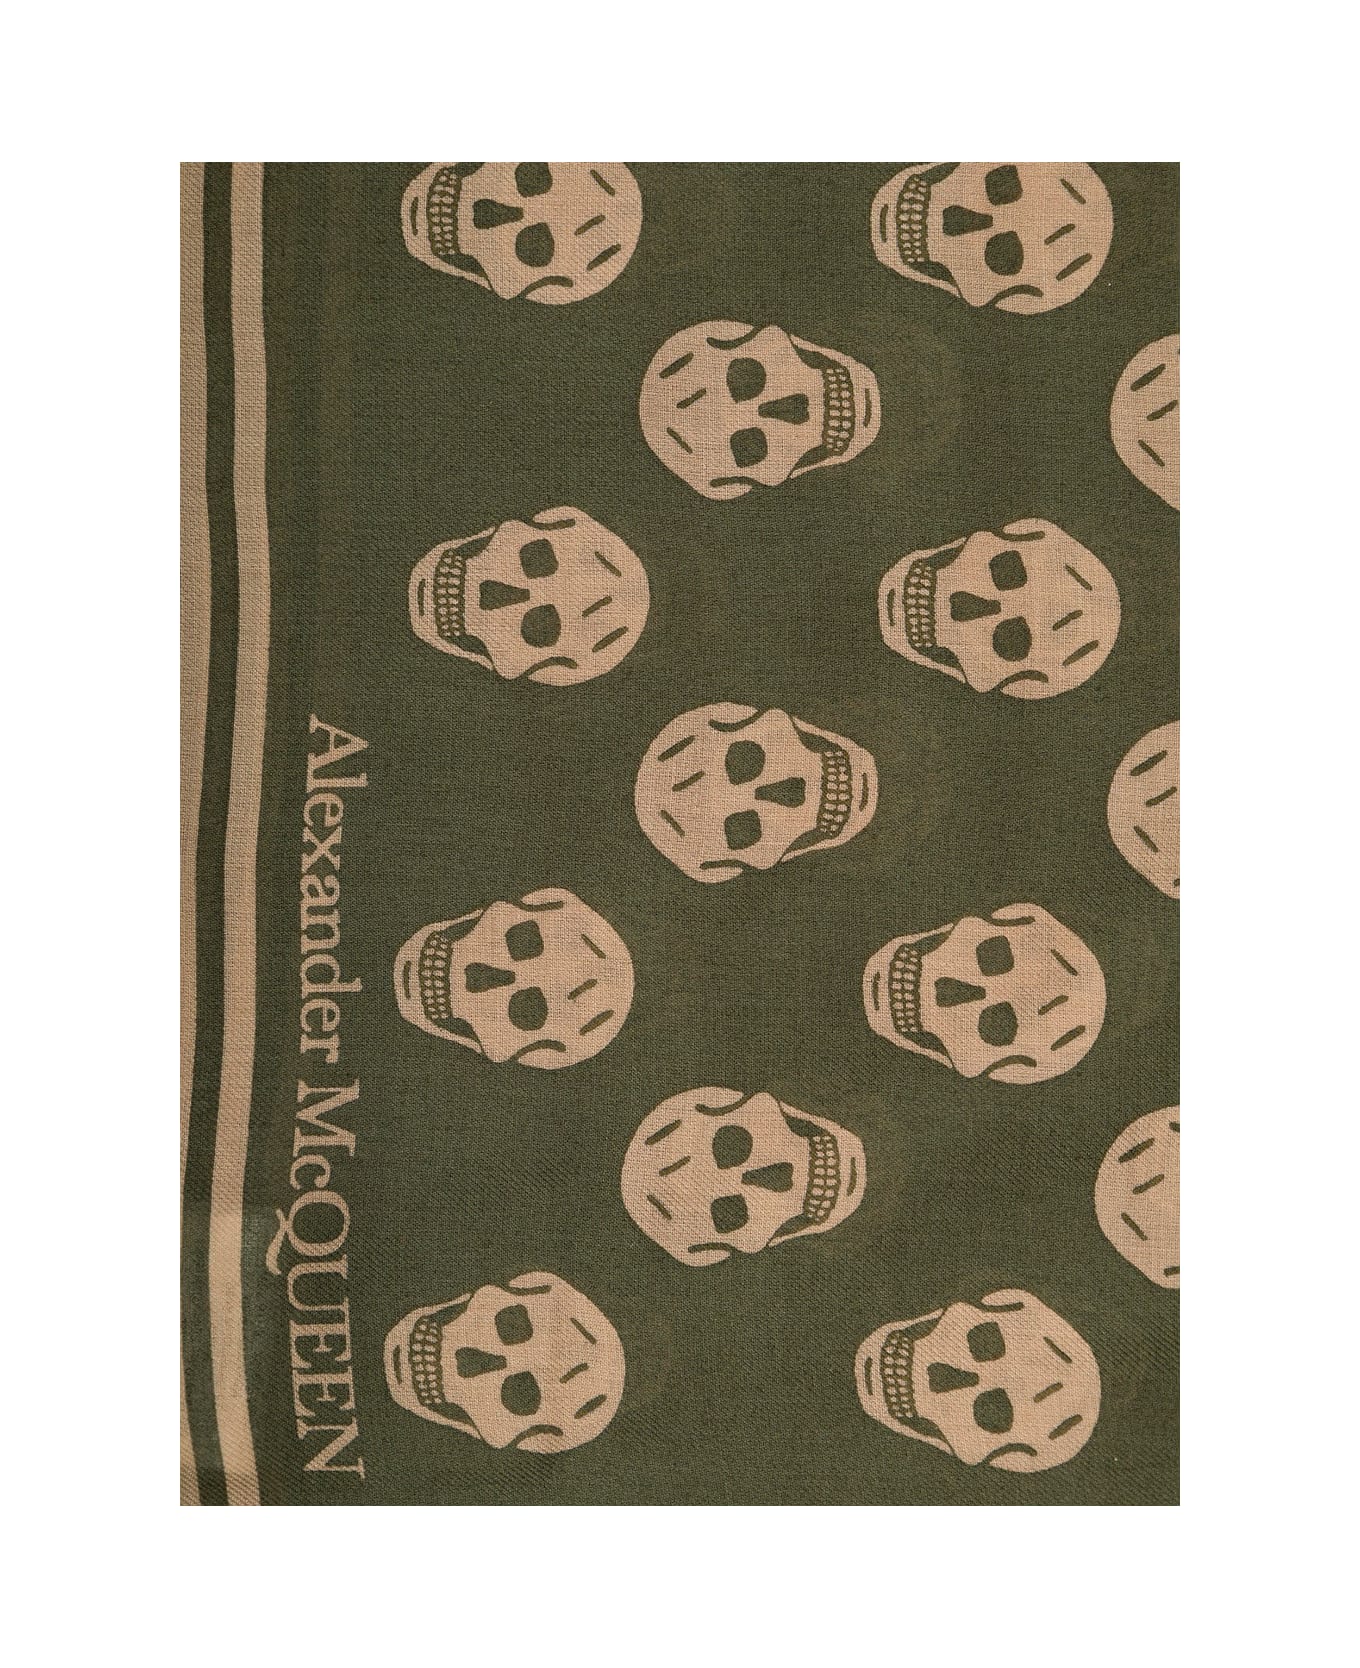 Alexander McQueen Scarf With Skull And Logo Print - Green